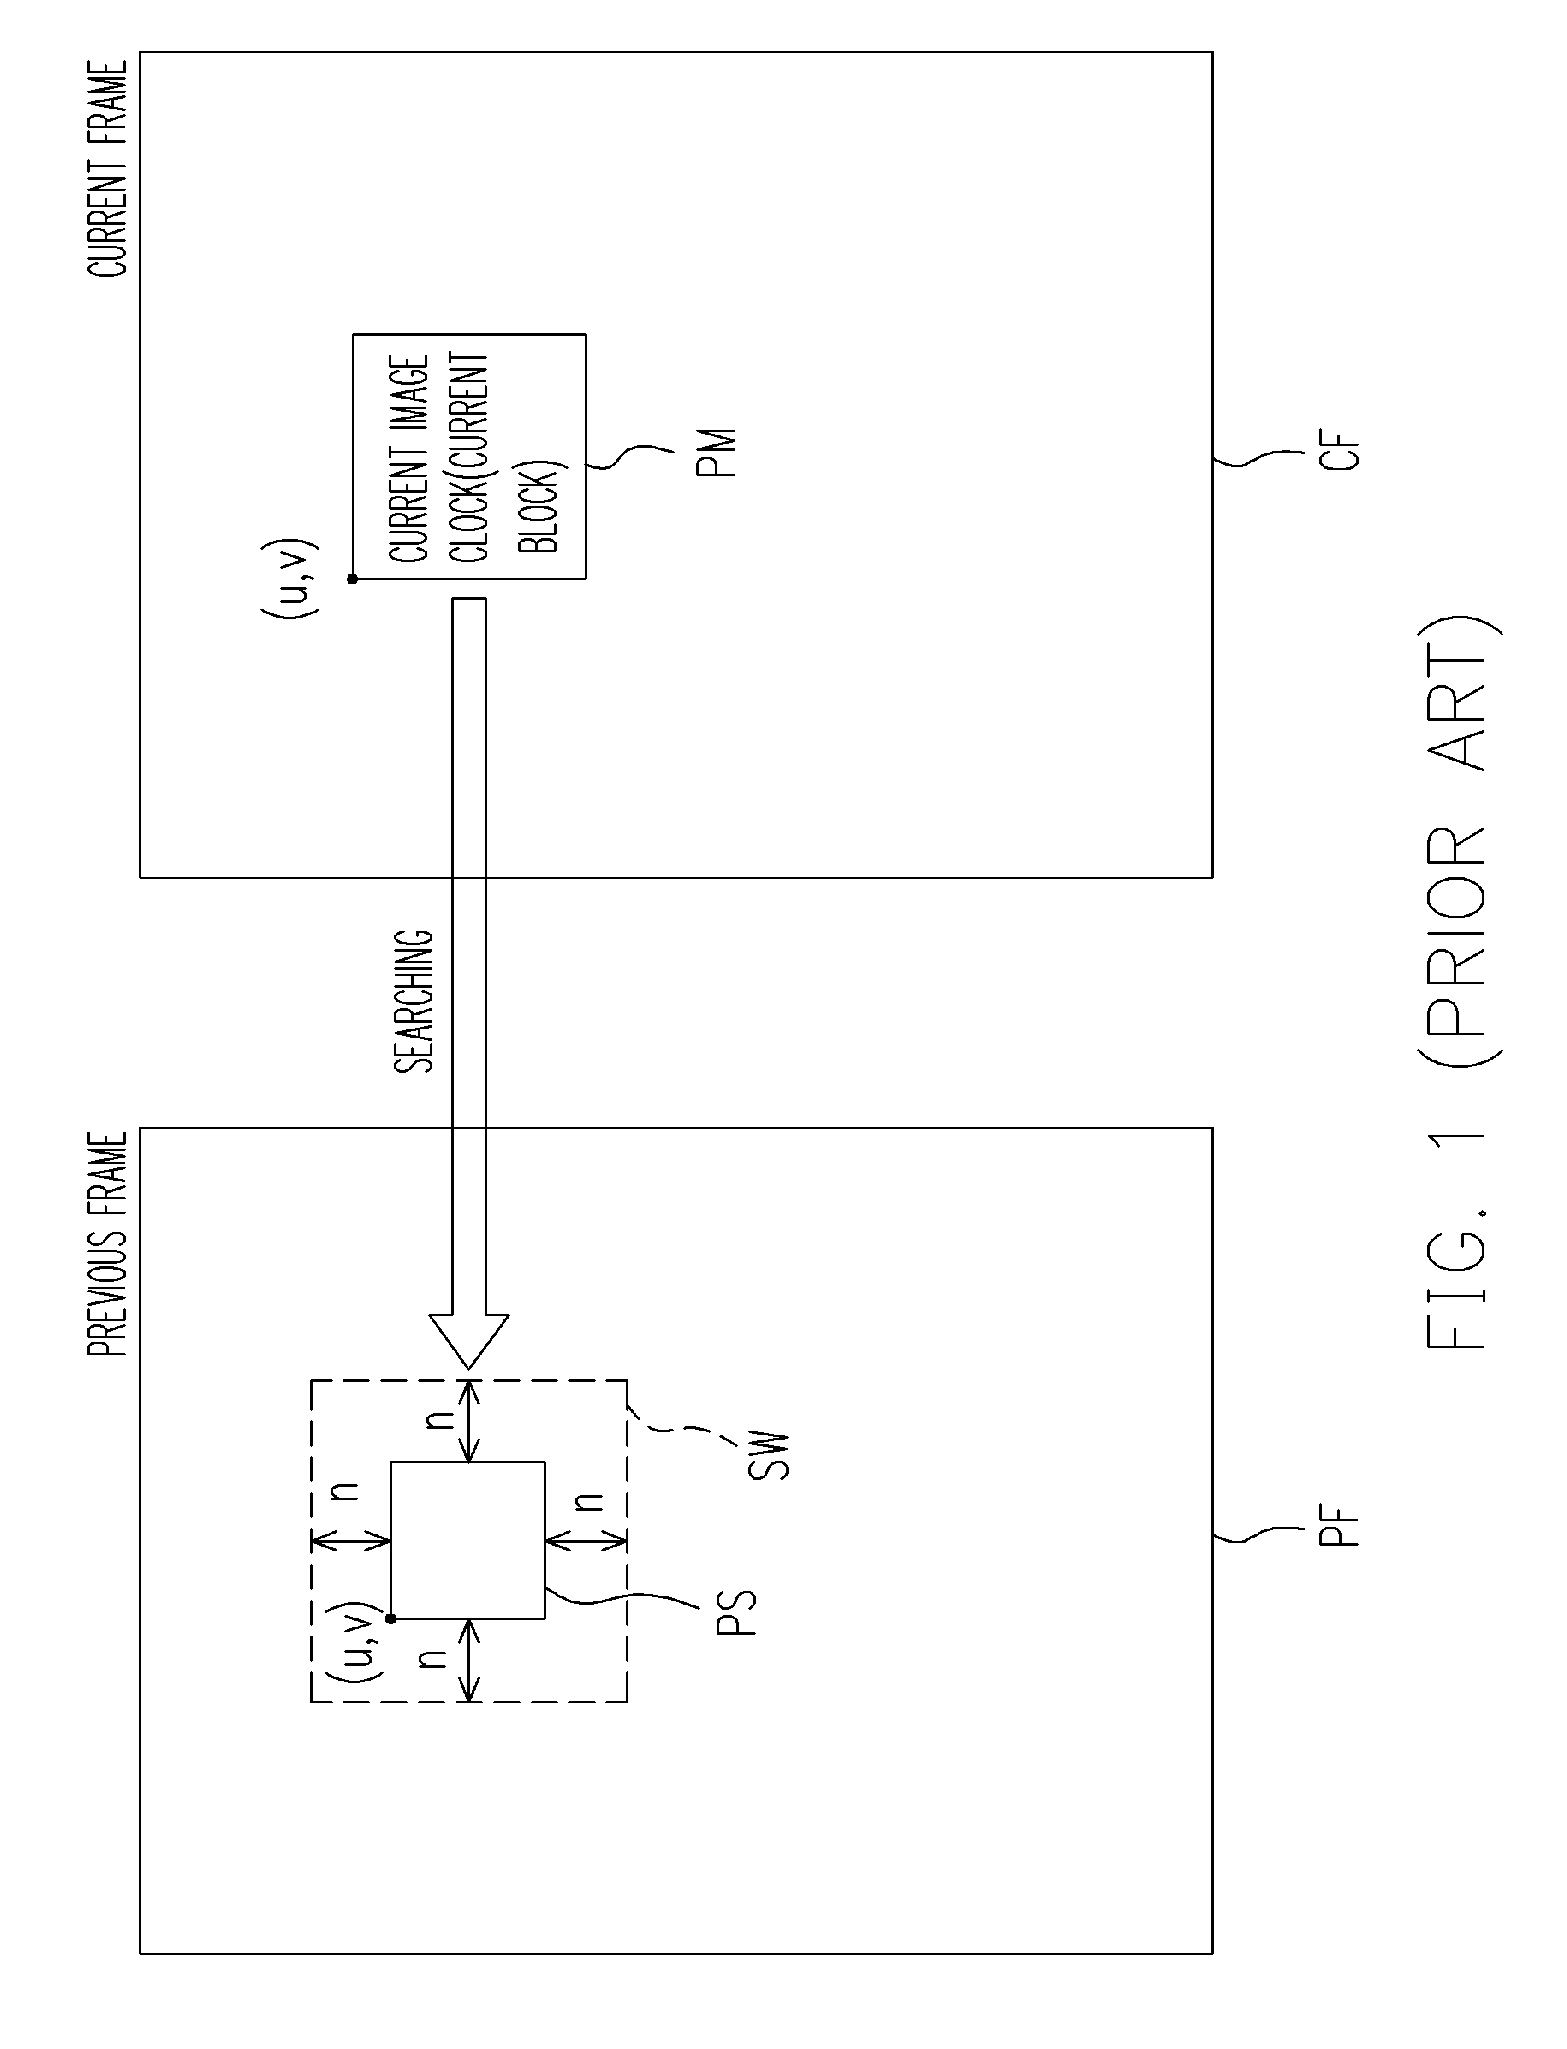 Motion estimation circuit and operating method thereof